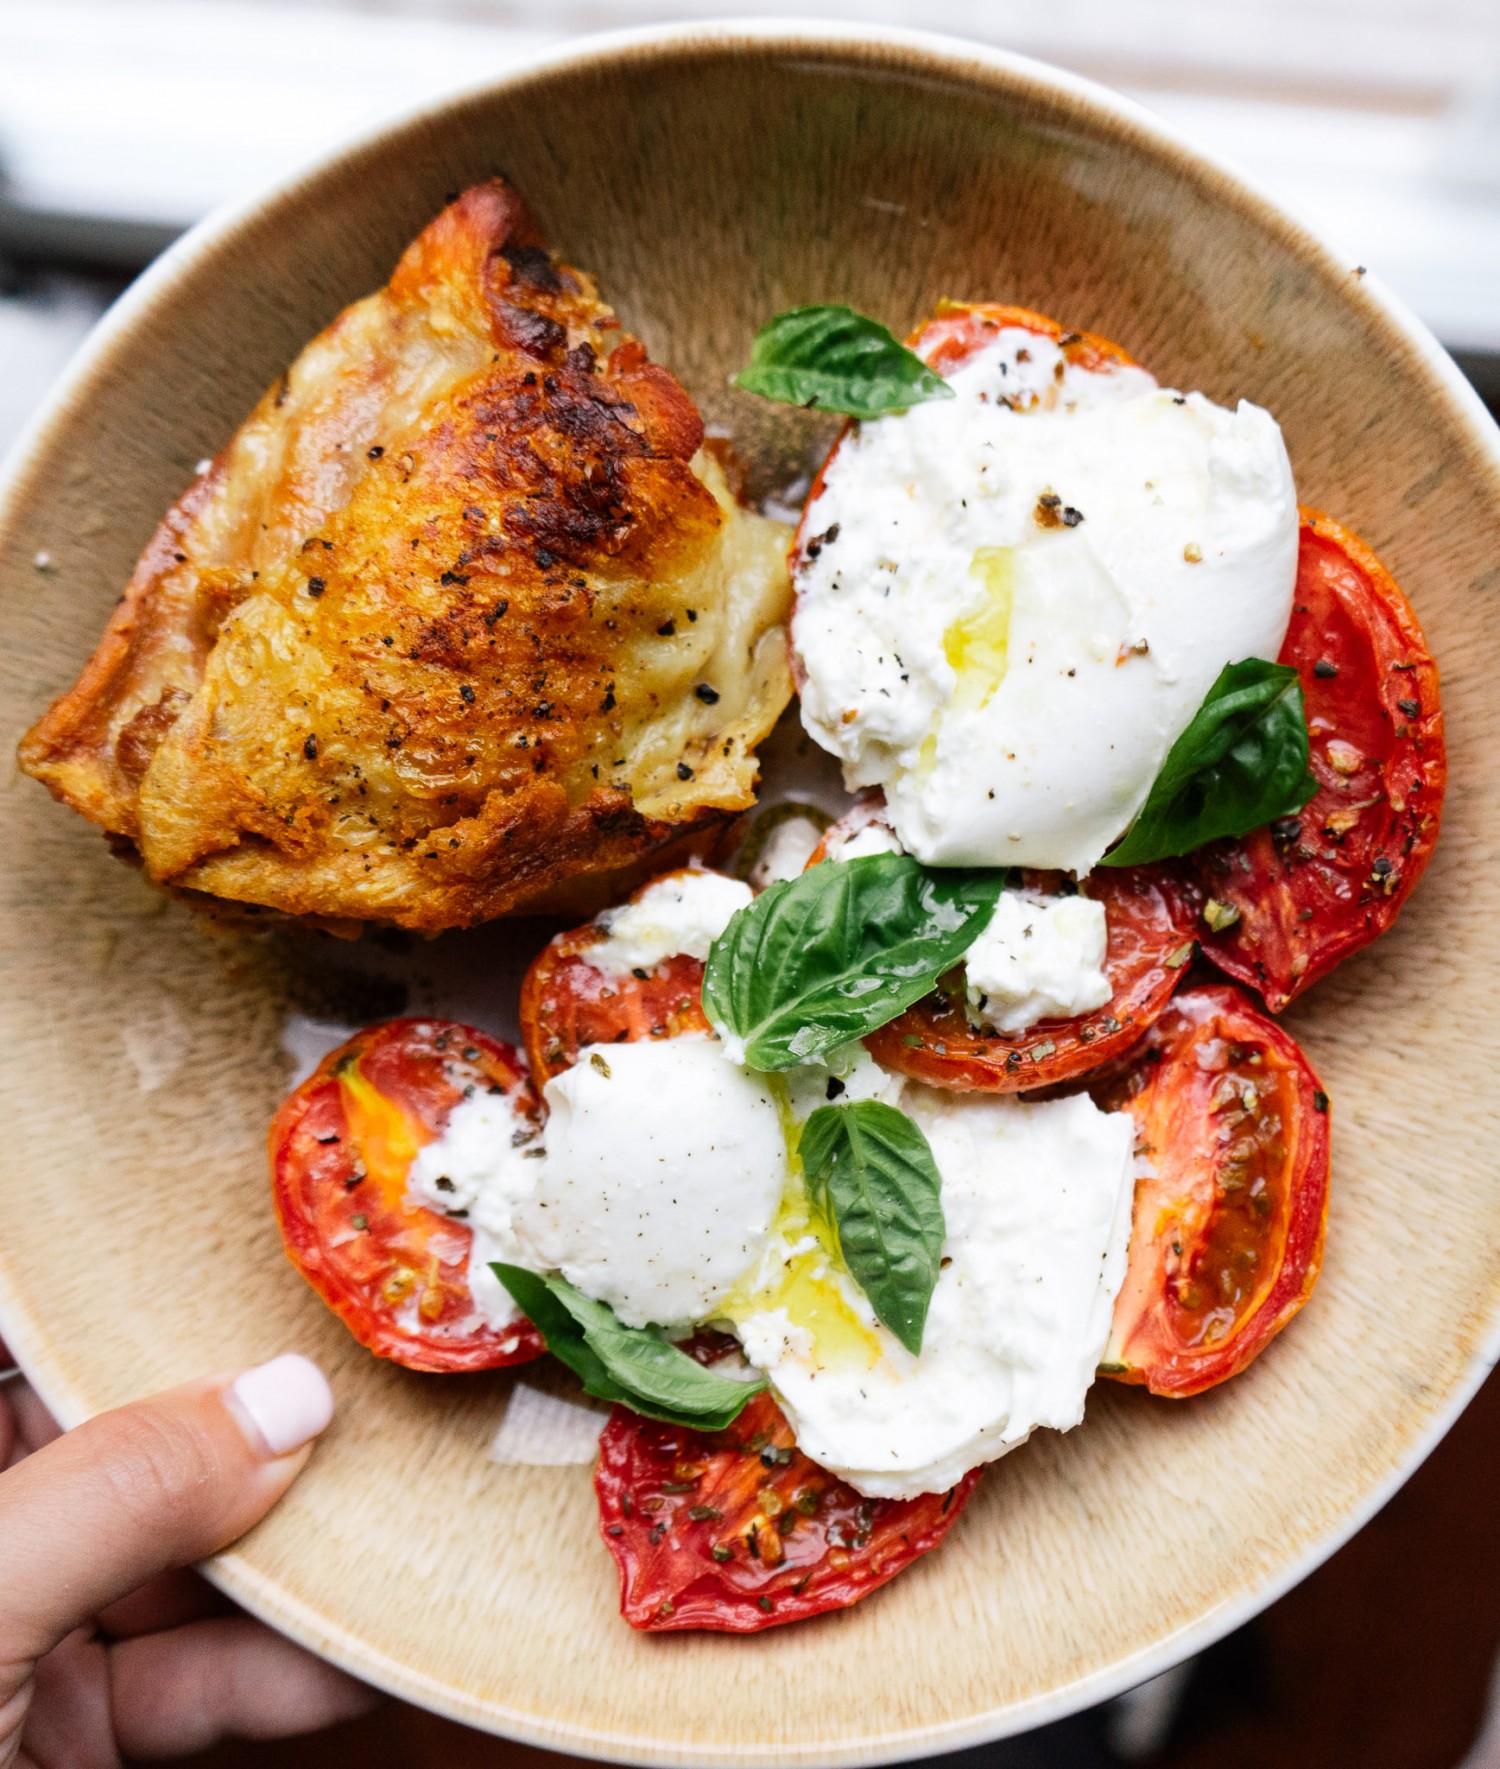 Above view of tomato and burrata salad on a plate with a crispy grilled chicken thigh